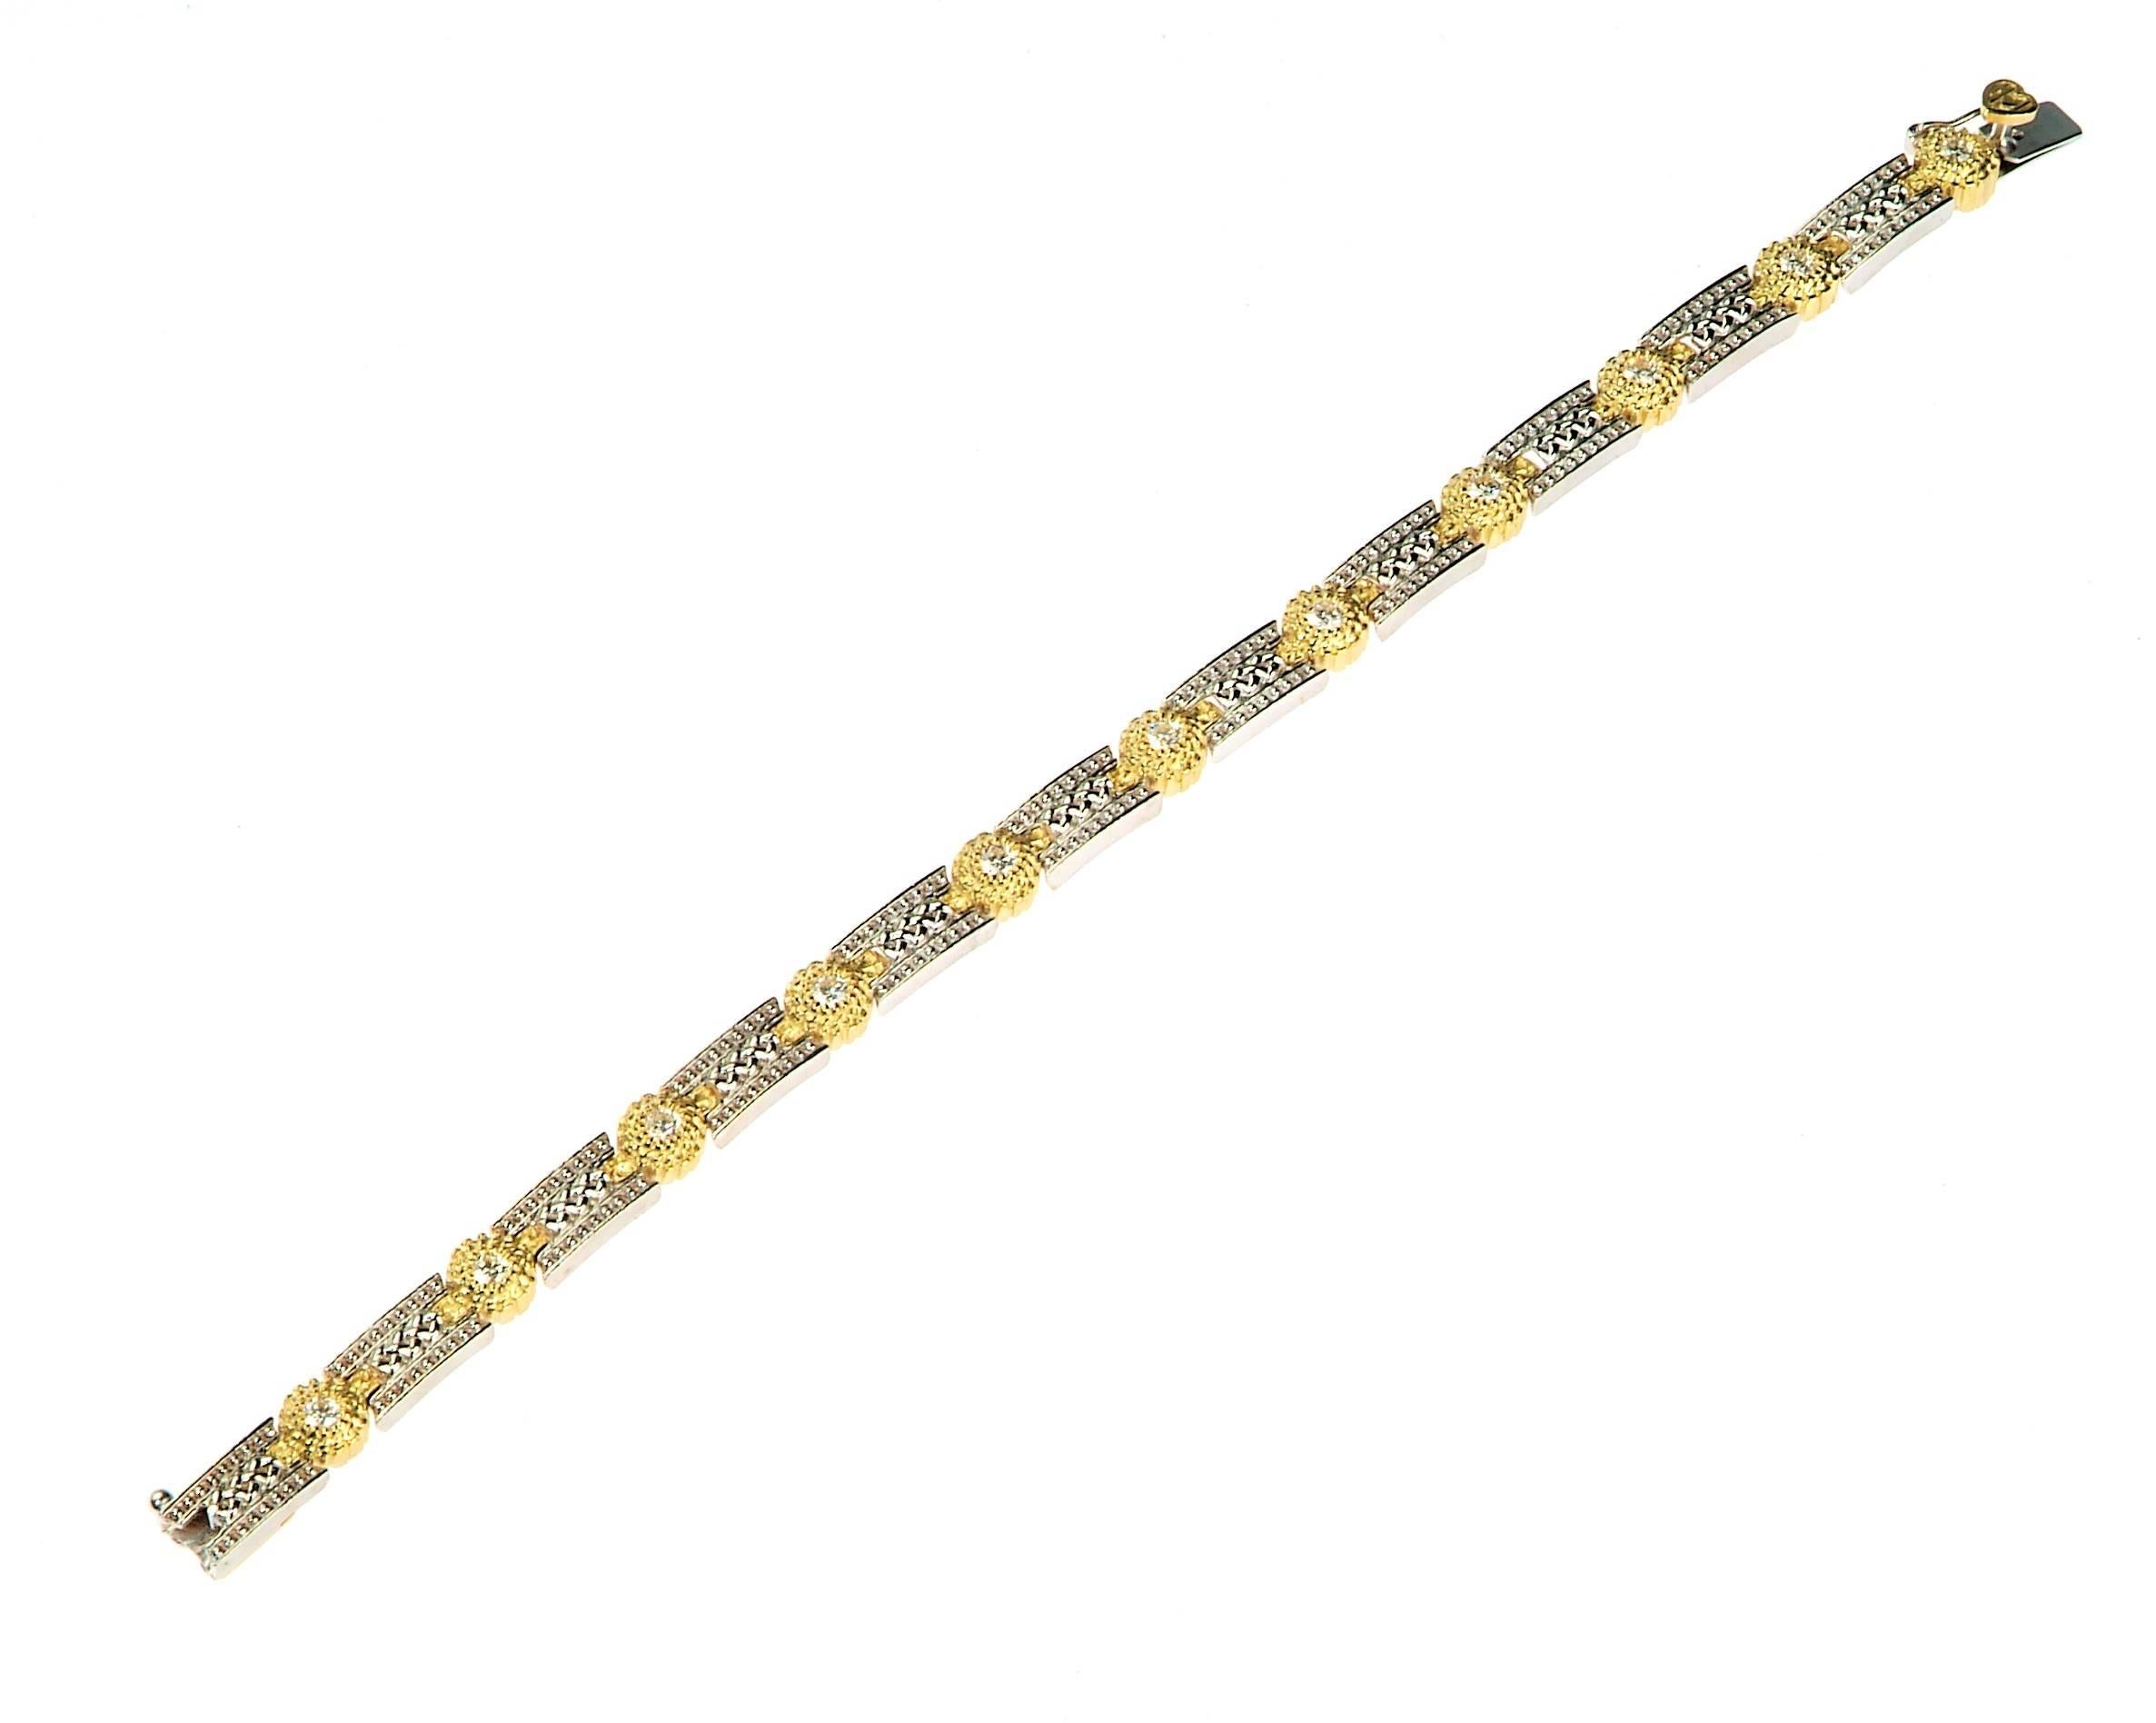 18K White and Yellow Two-Tone Gold Tennis Bracelet with Diamonds by Stambolian

1.10 carat G Color, VS Clarity Diamonds

Push button clasp with safety

7 inches in length
0.3 inch wide

Signed Stambolian and has the Trademark 